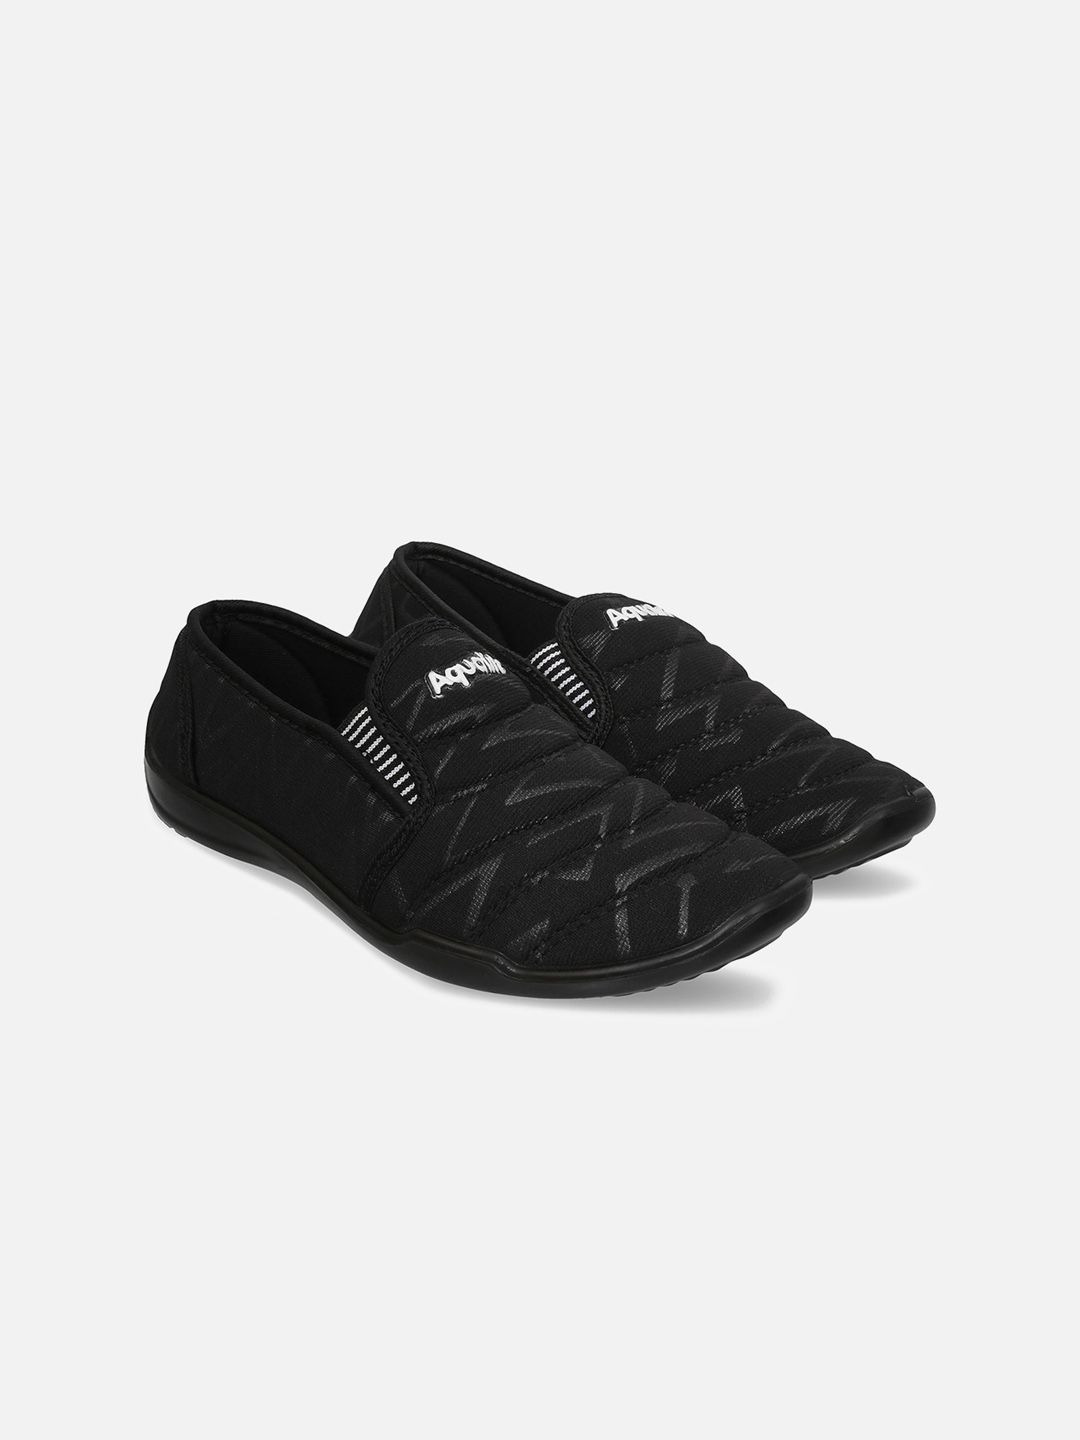 Aqualite Women Black Woven Design Driving Shoes Price in India